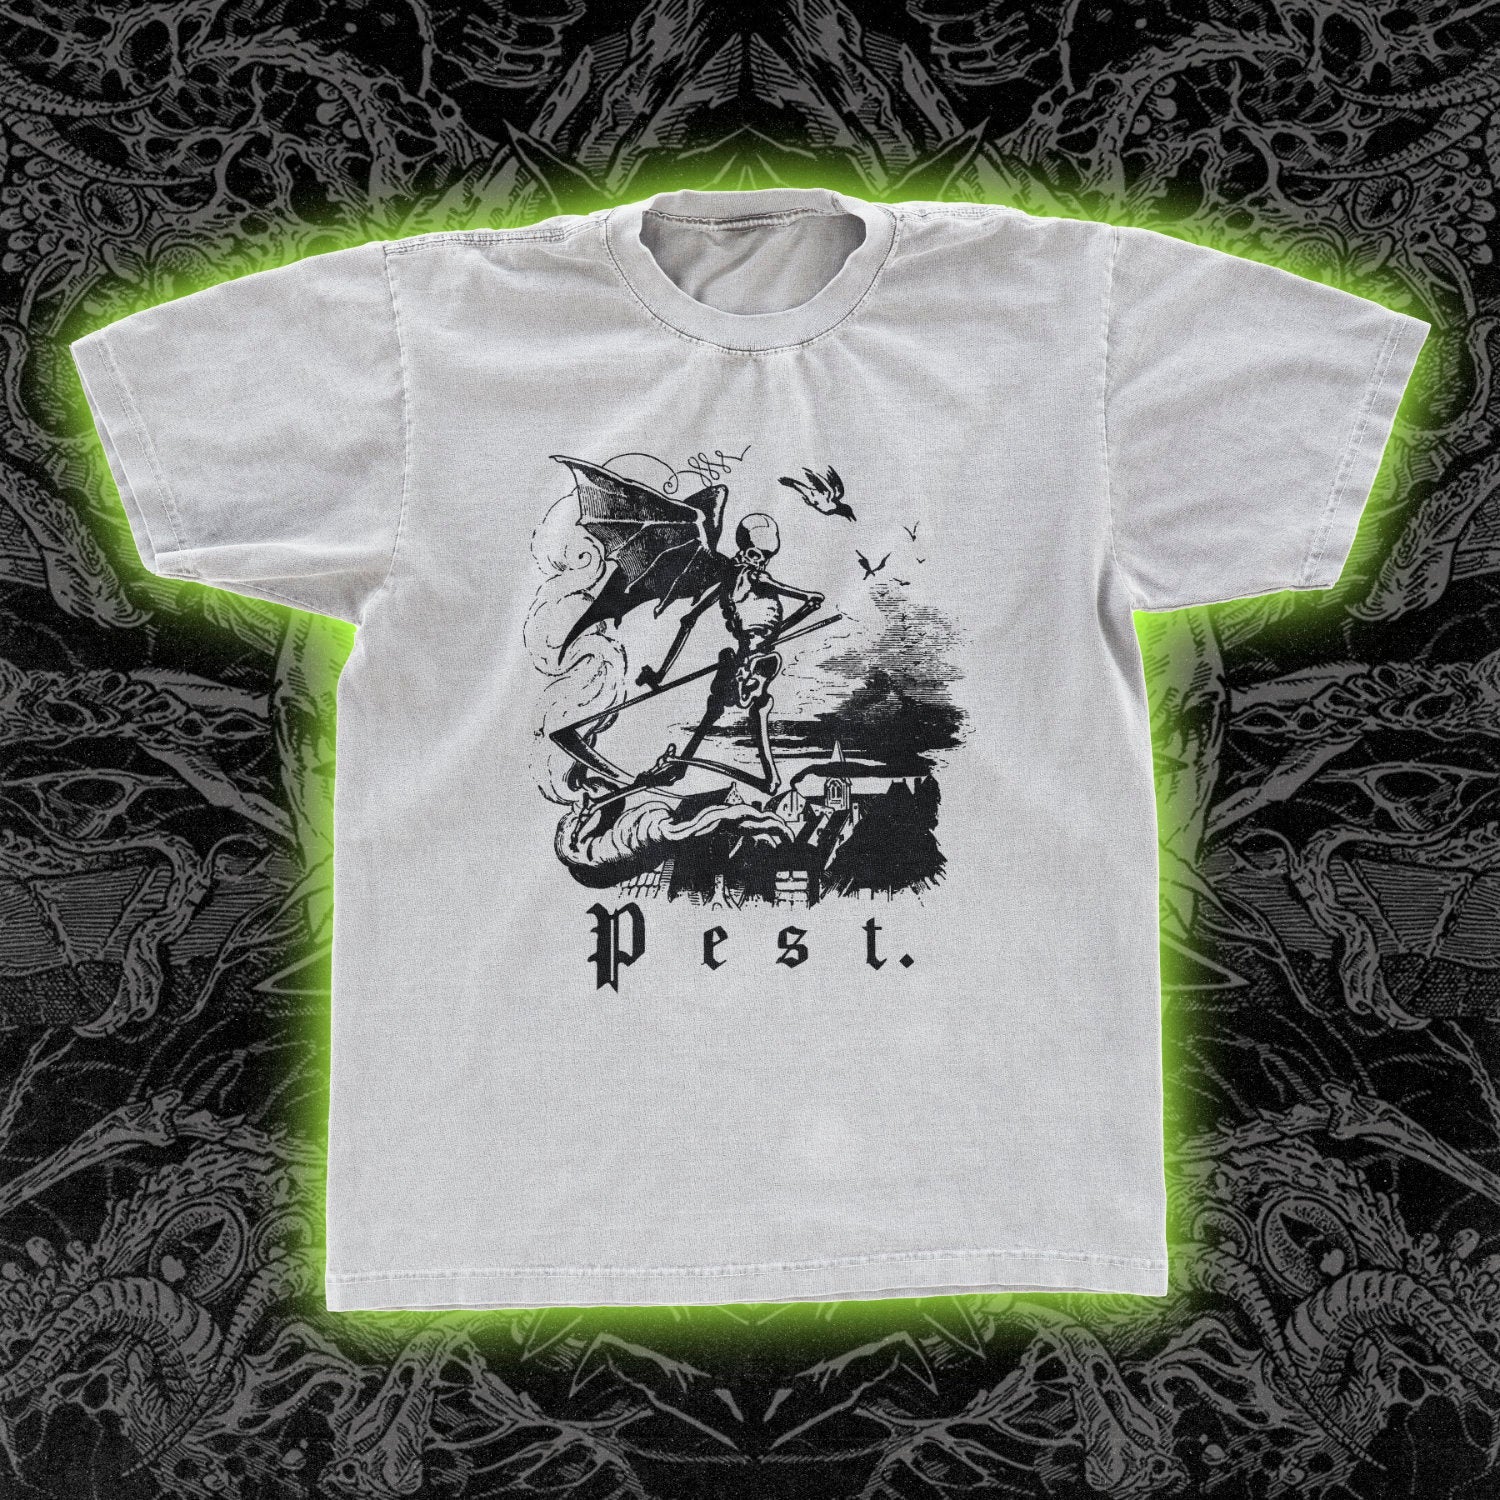 Winged Plague Classic Tee